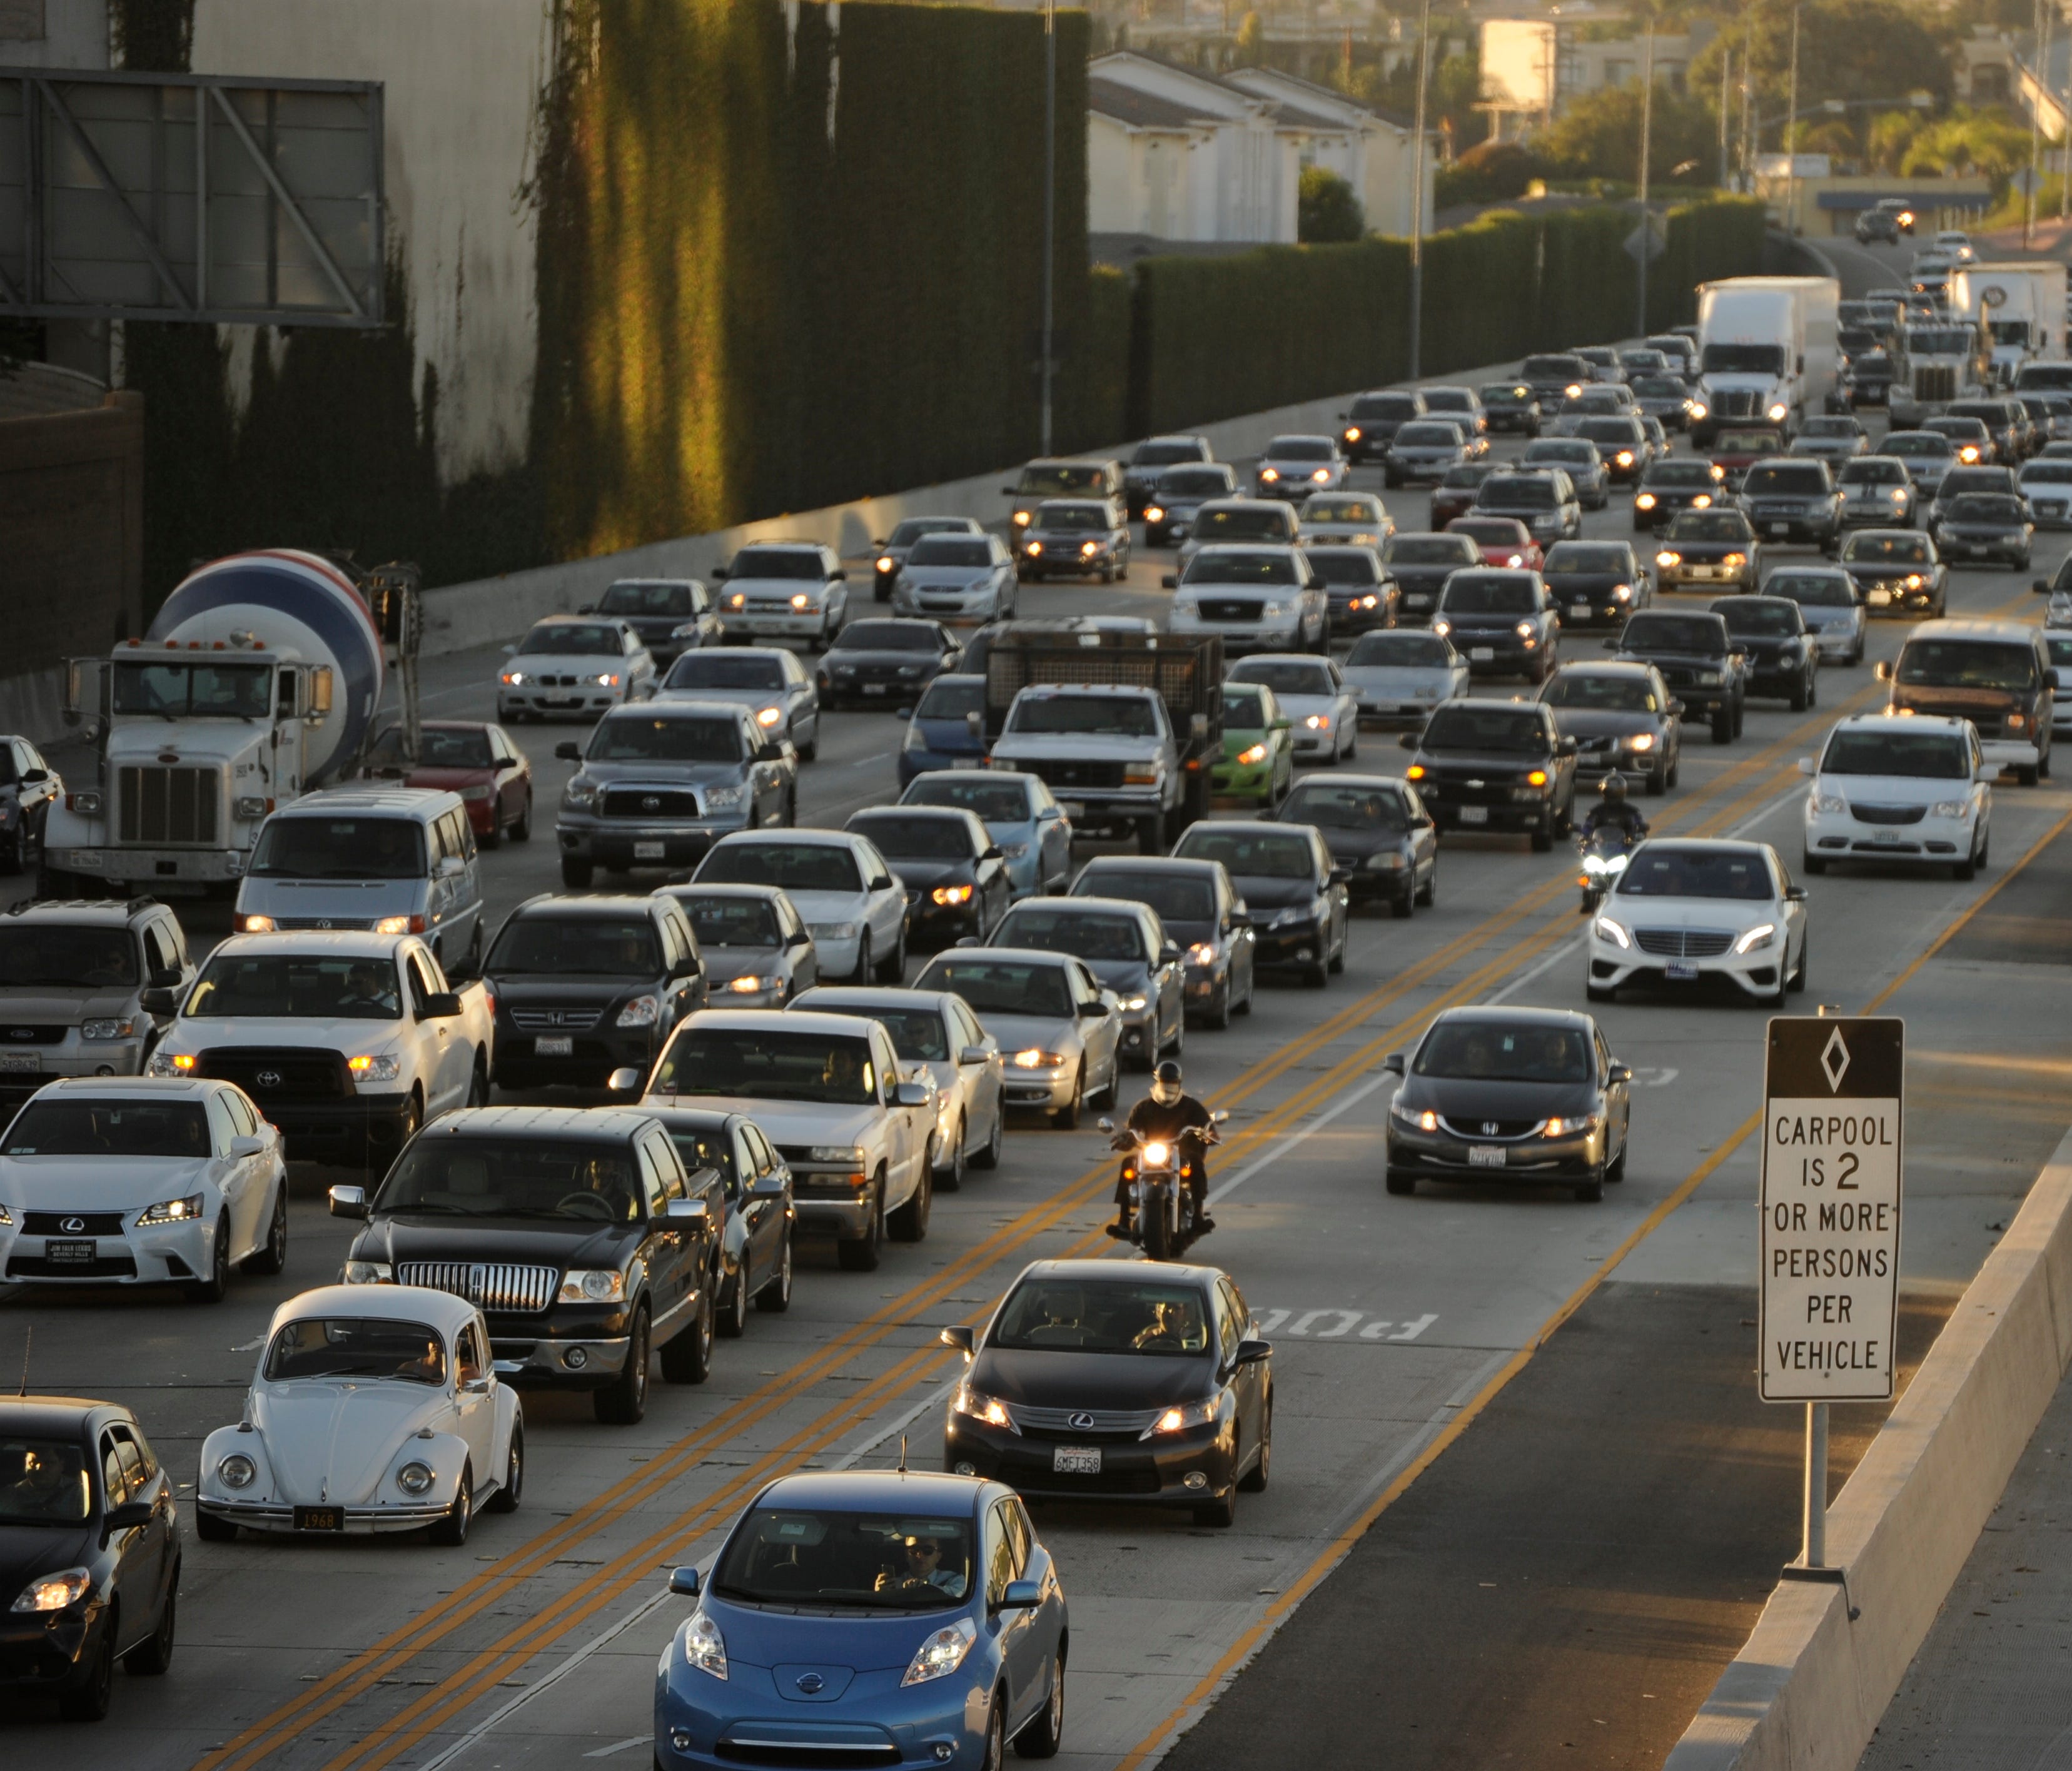 Southbound traffic on the San Diego Freeway south of the Santa Monica Freeway in the Los Angeles area.